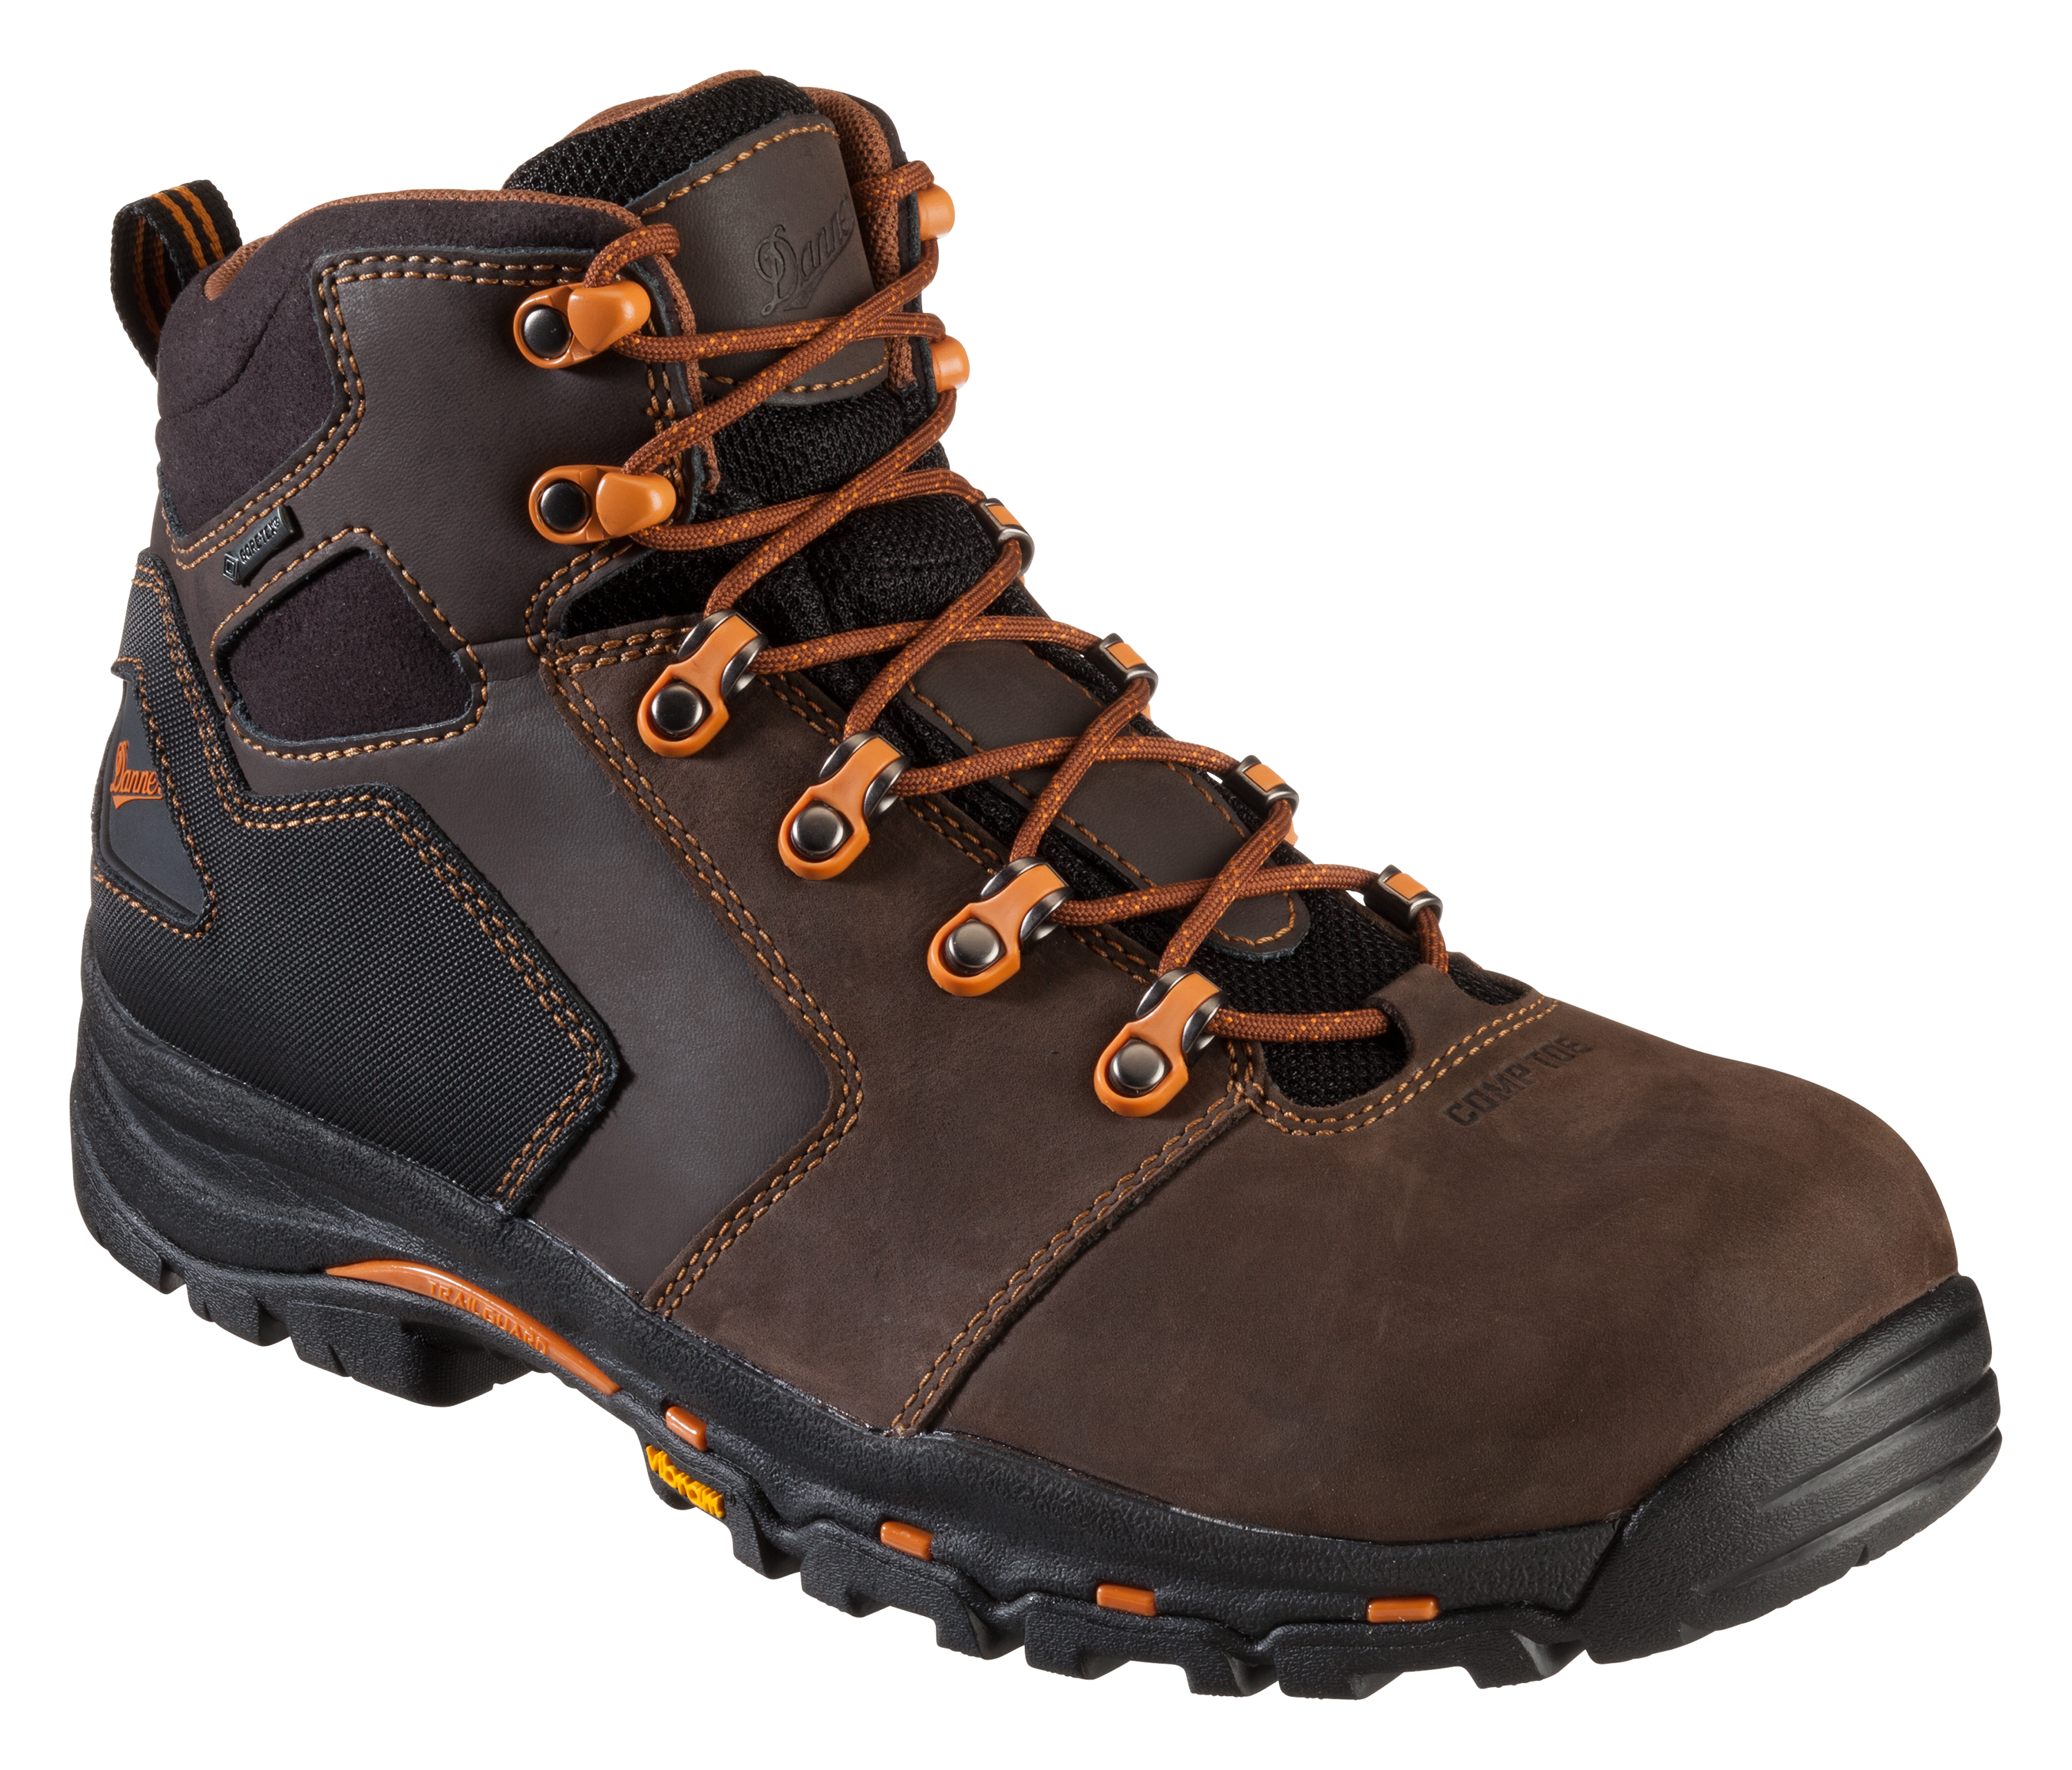 Danner Vicious GORE-TEX Non-Metallic Safety Toe Work Boots for Men - Brown - 14M